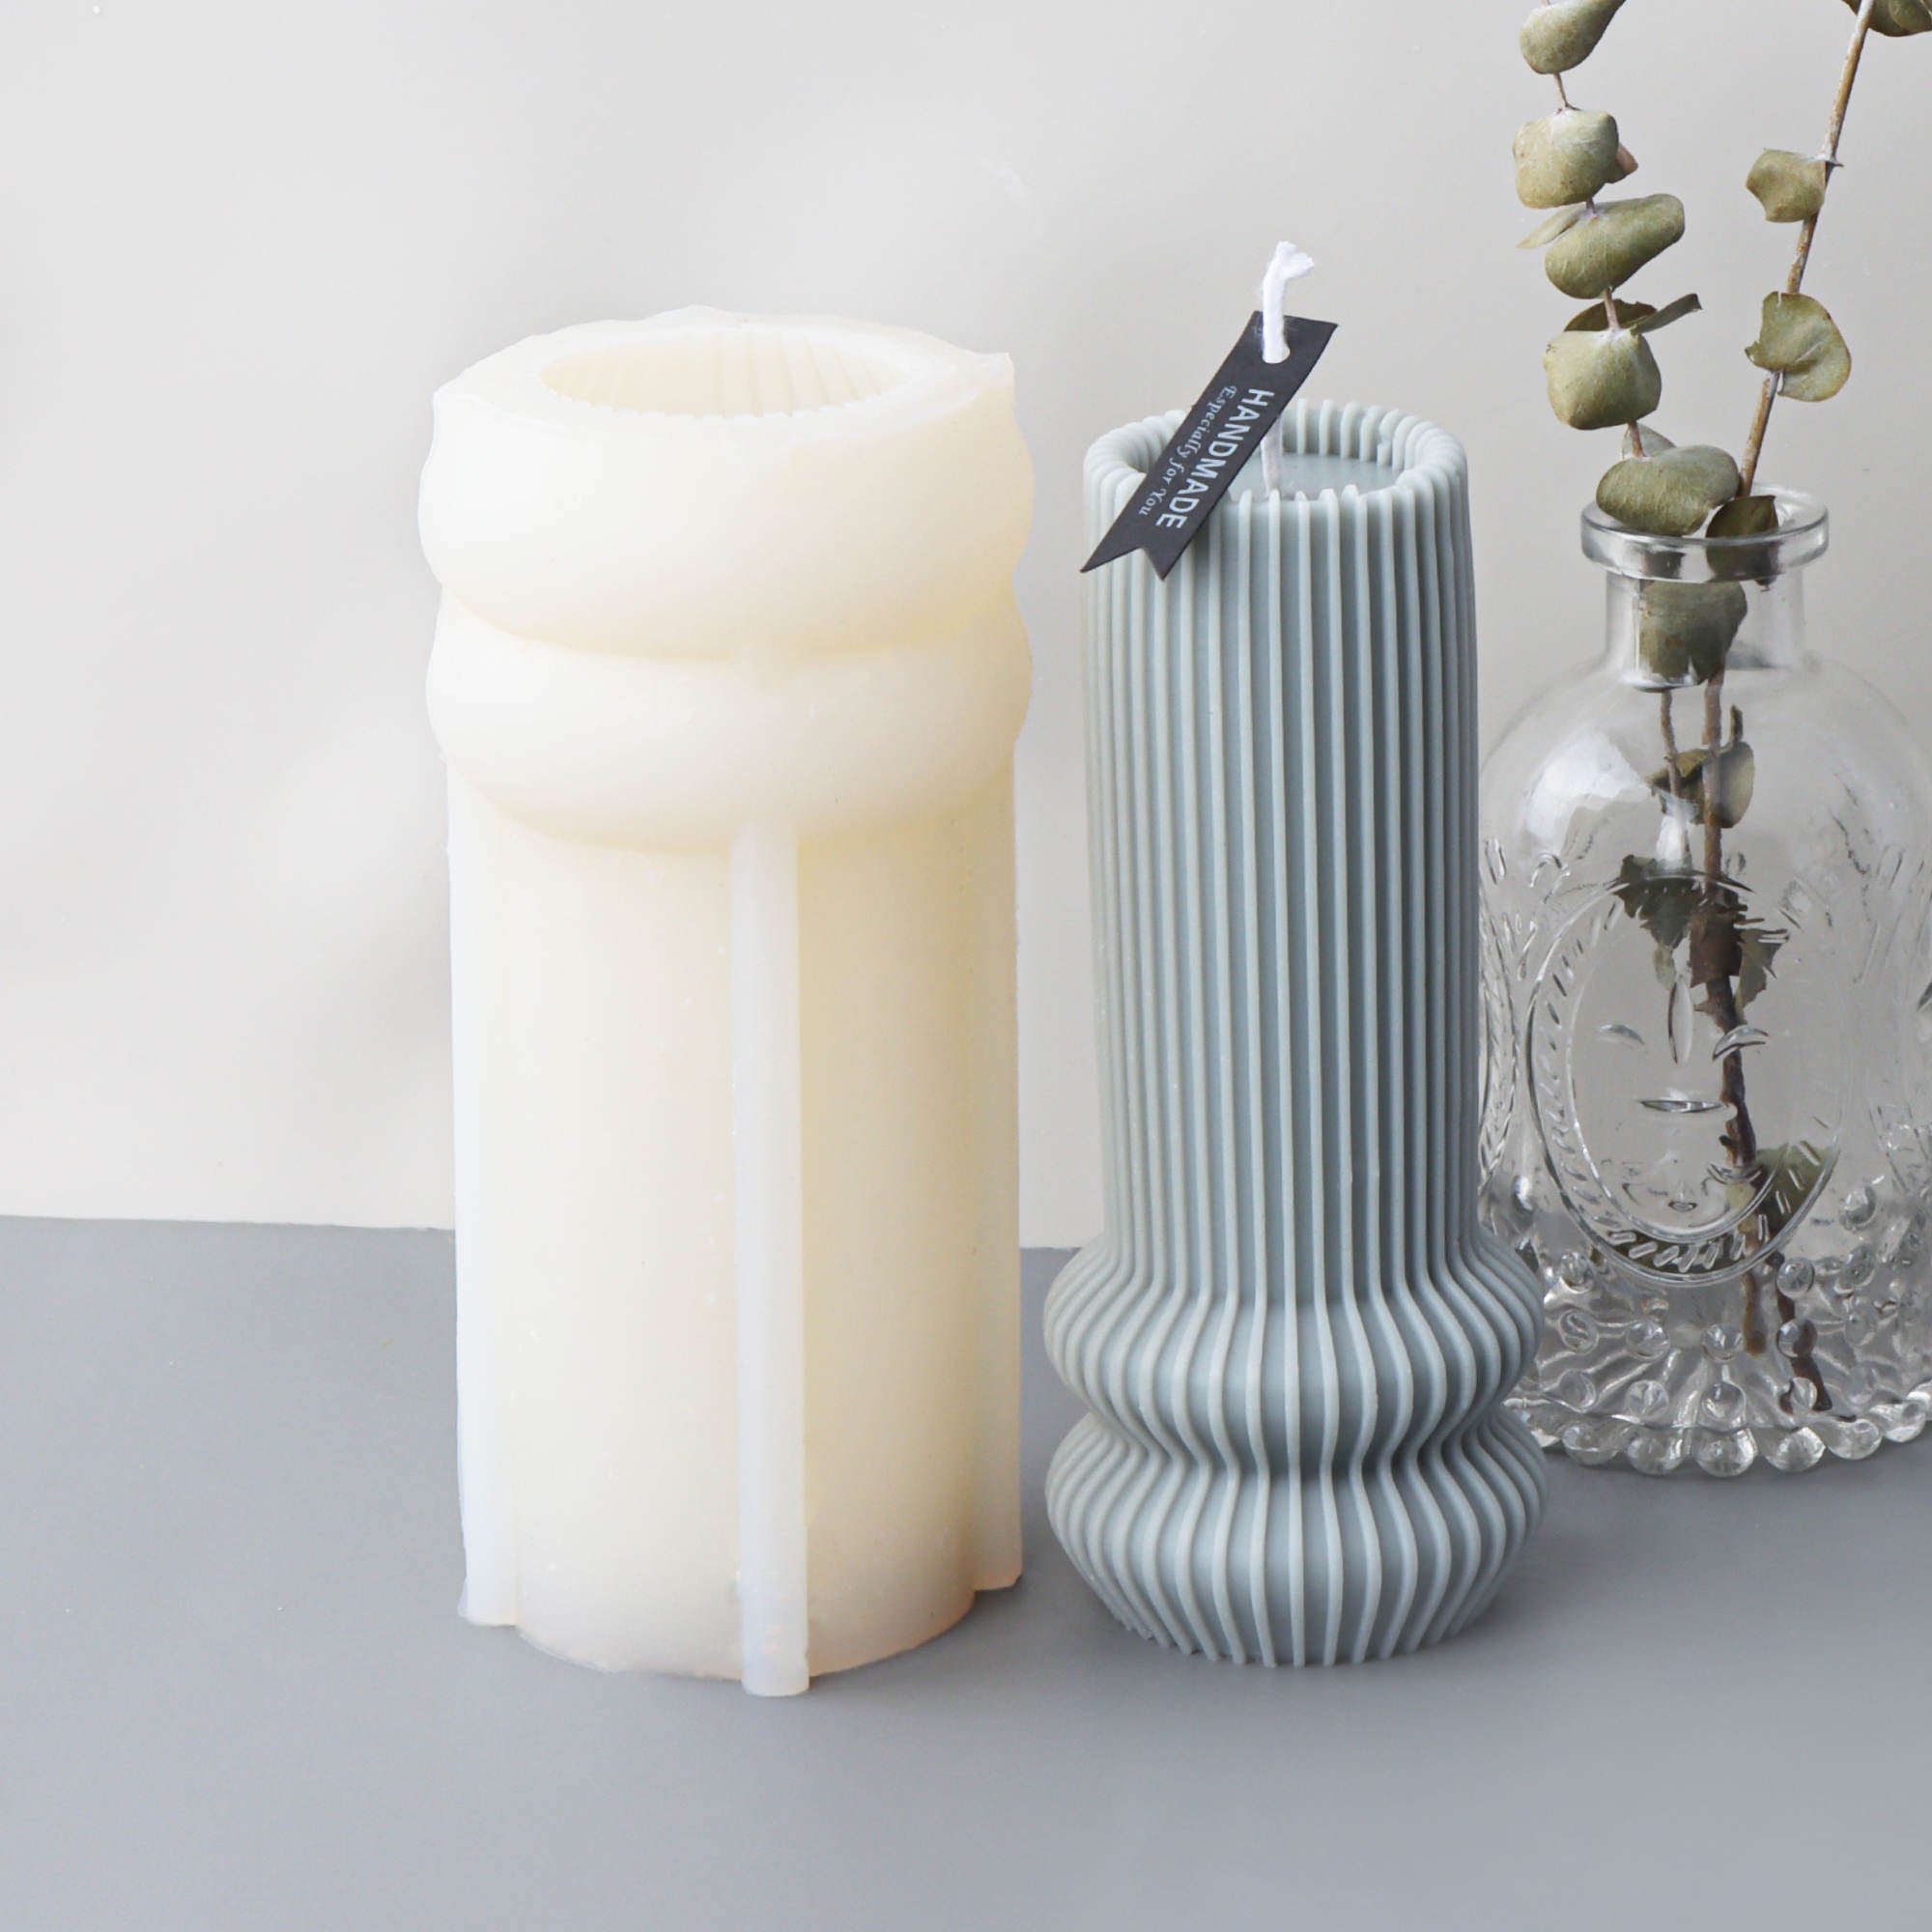 Nordic Vase Candle Moulds 3 - Silicone Mould, Mold for DIY Candles. Created using candle making kit with cotton candle wicks and candle colour chips. Using soy wax for pillar candles. Sold by Myka Candles Moulds Australia